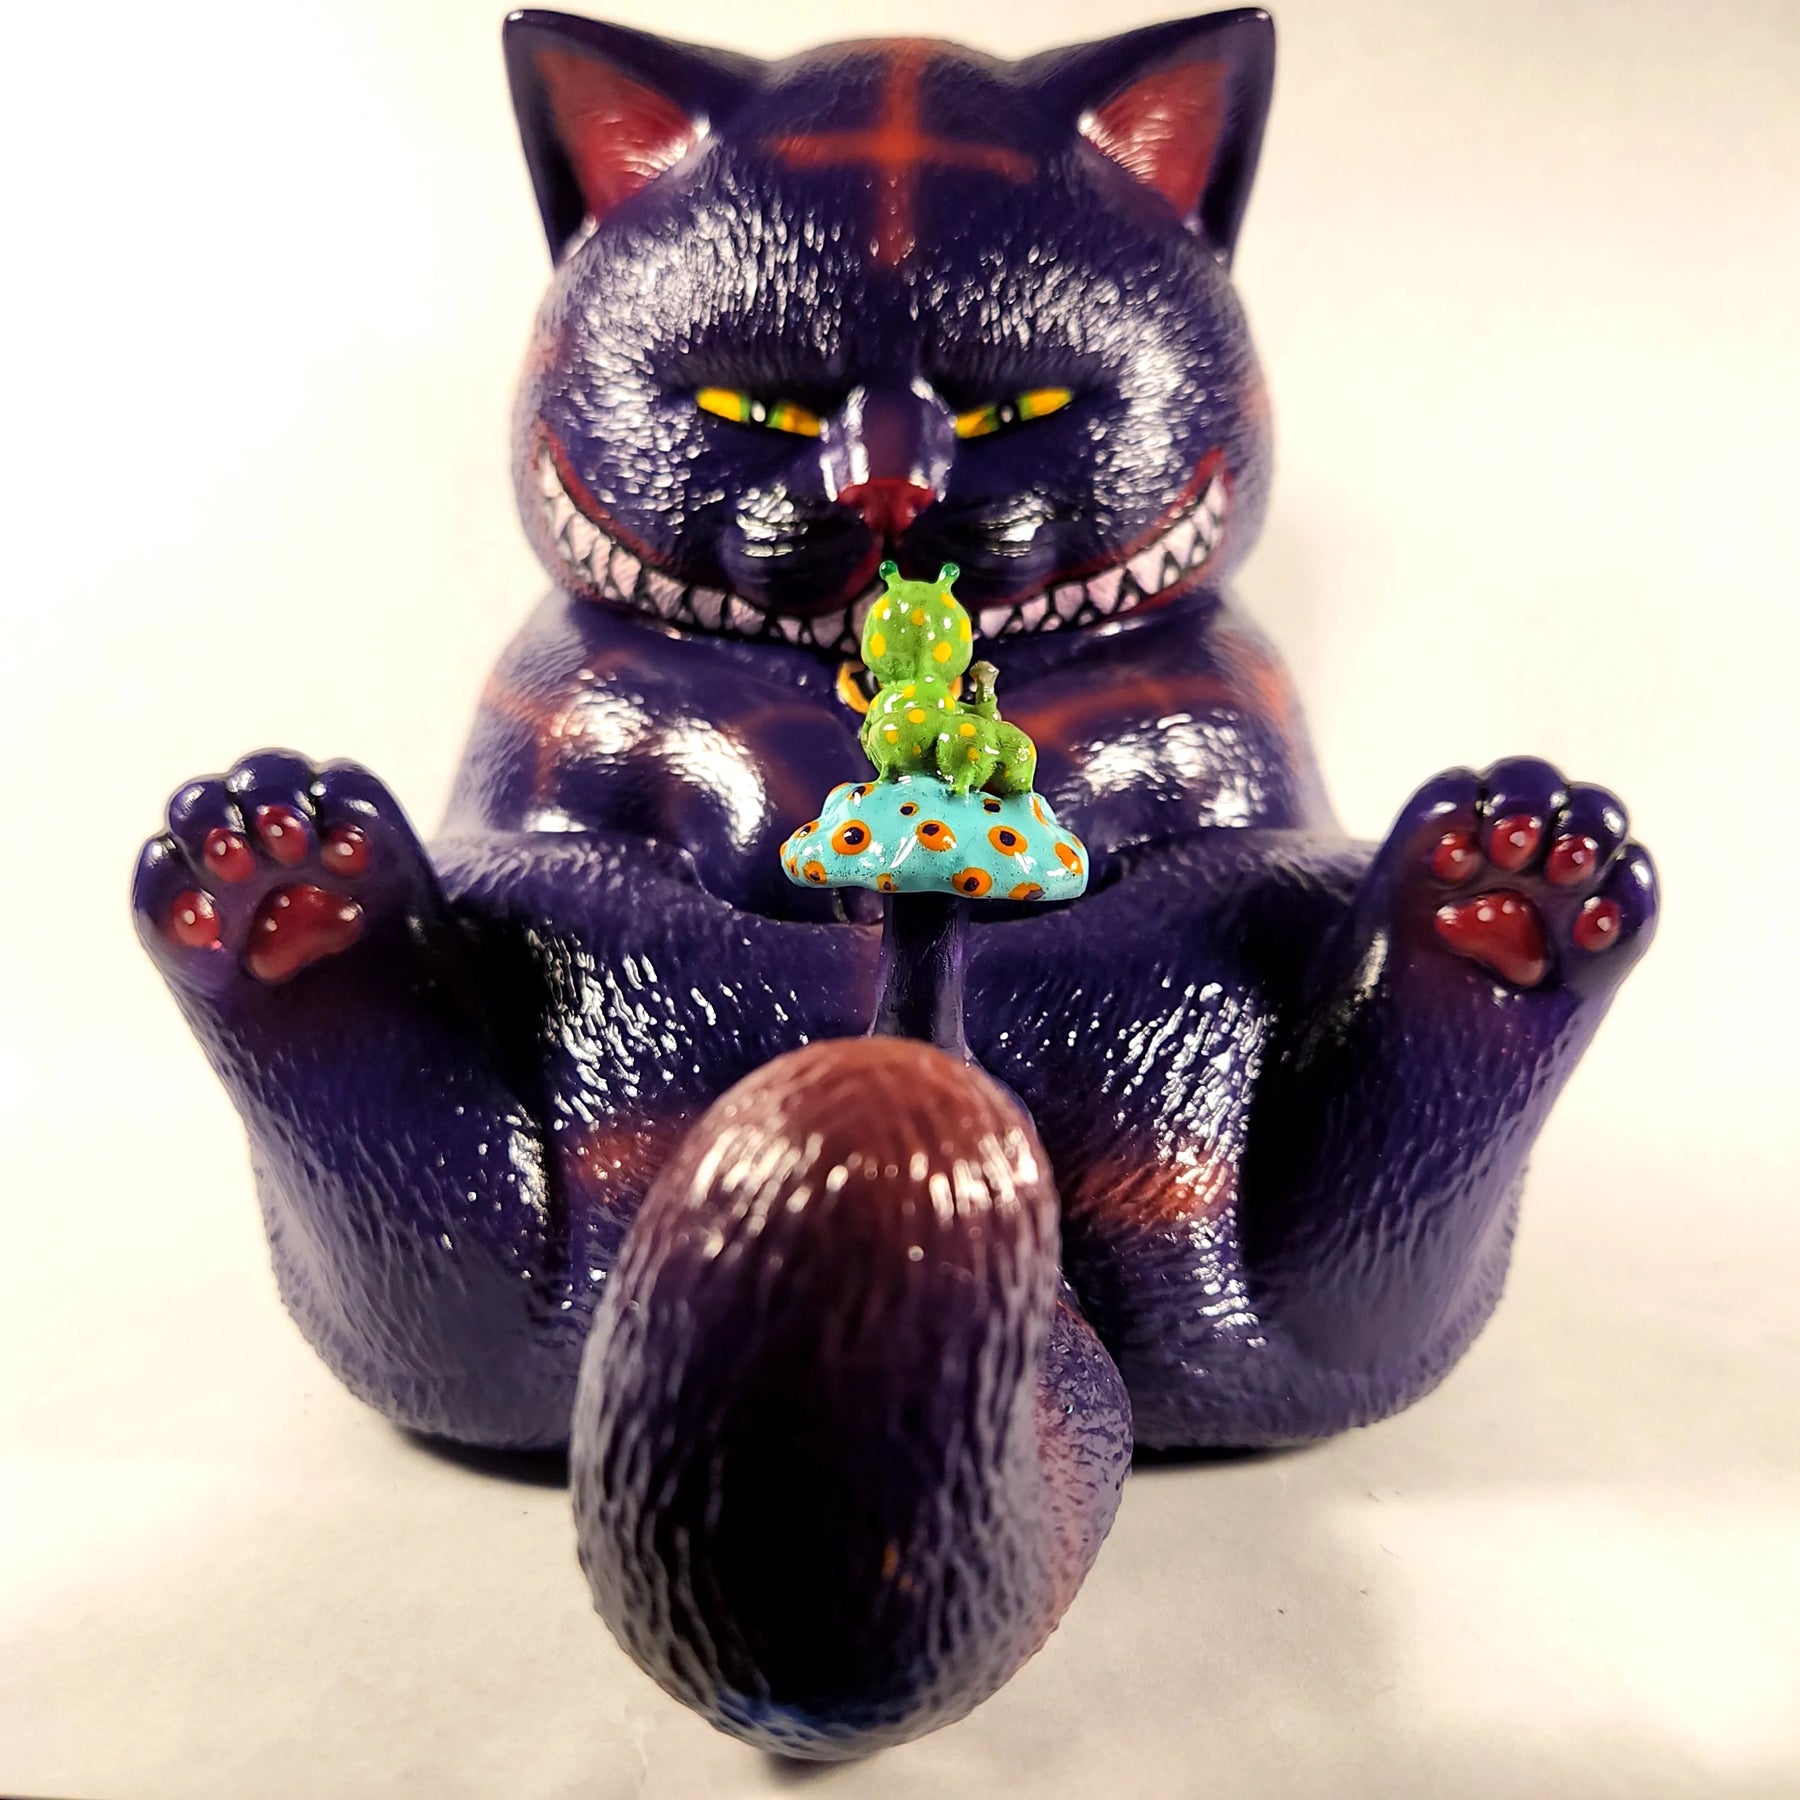 The Cat and the Caterpillar custom by Forces of Dorkness Available Now